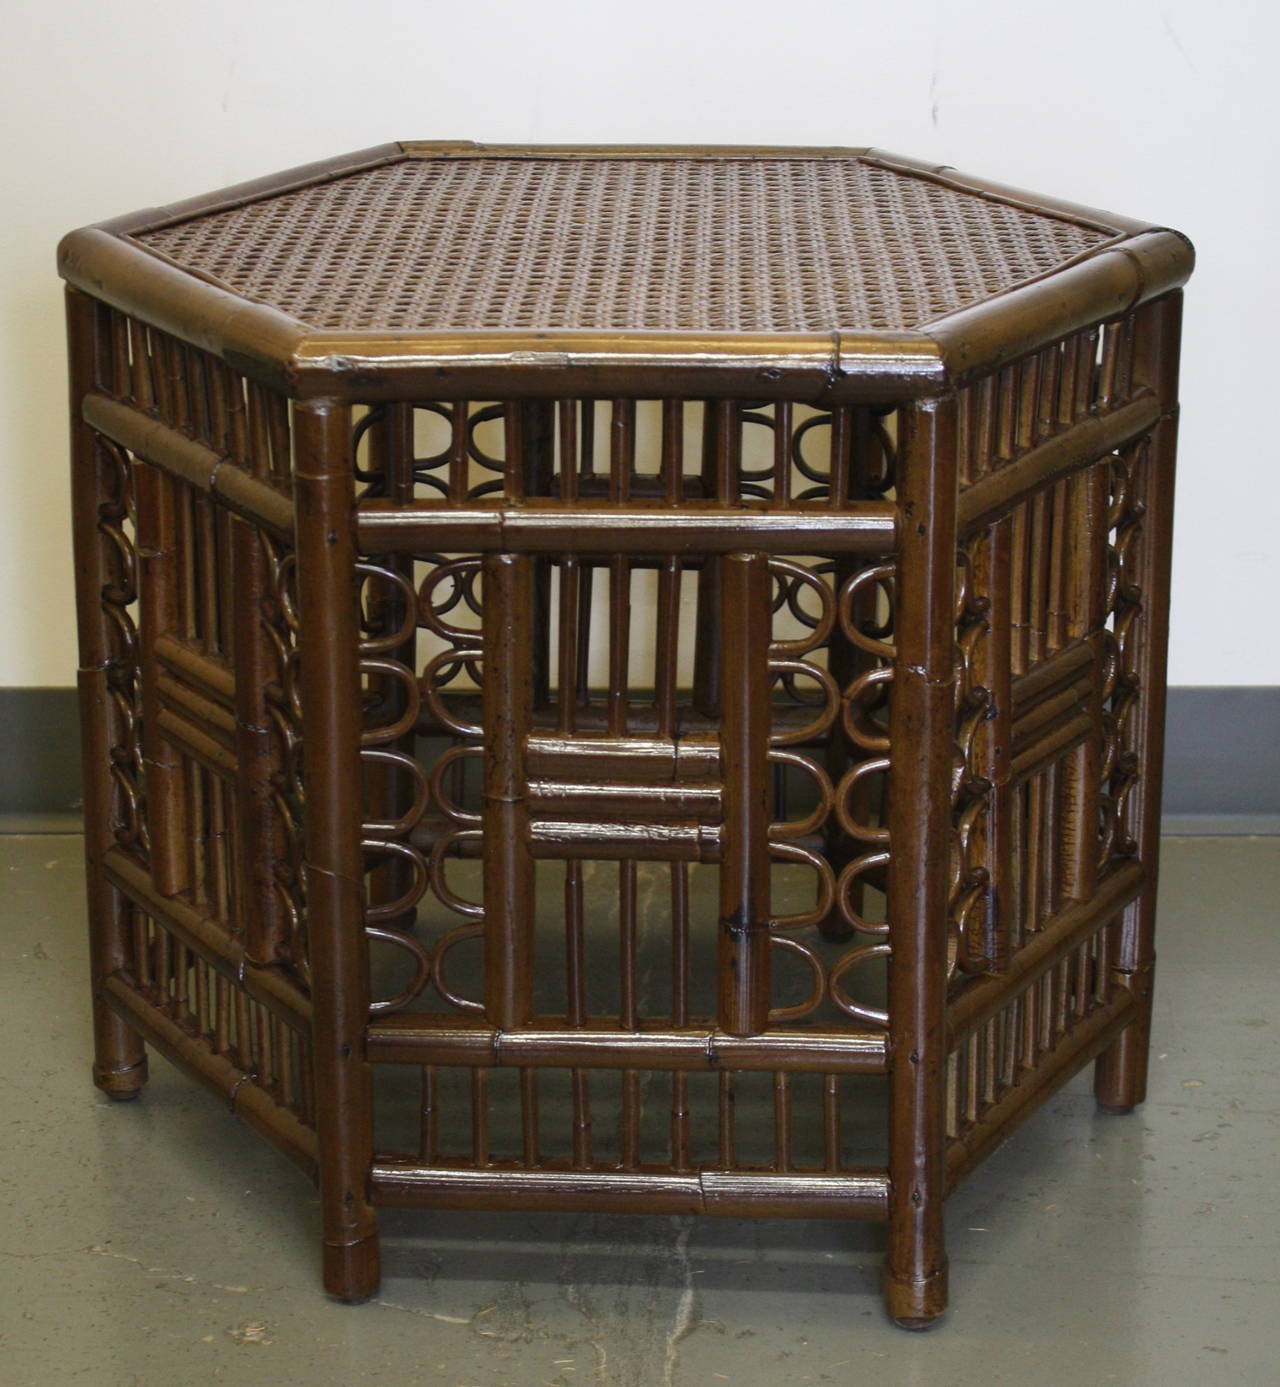 Each with hexagonal top inset with caning; raised on open fretwork supports. Recently restored to a glossy finish.